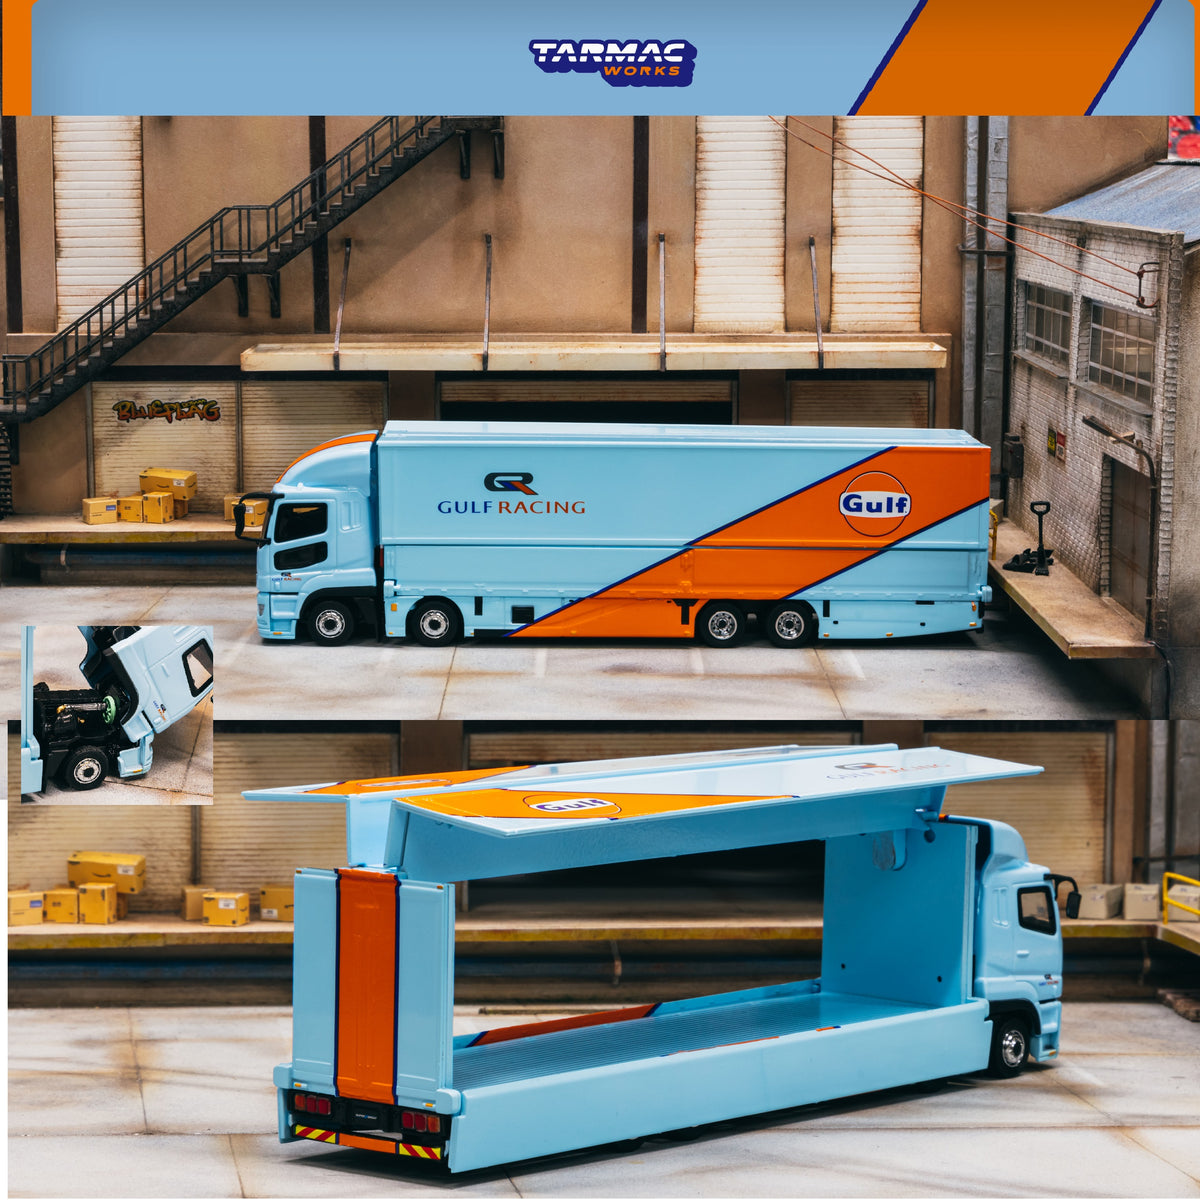 PREORDER TARMAC WORKS TRUCK64 1/64 Mitsubishi Fuso Super Great GULF Racing  T64T-TL001-GULF (Approx. Release Date : NOVEMBER 2023 subject to 